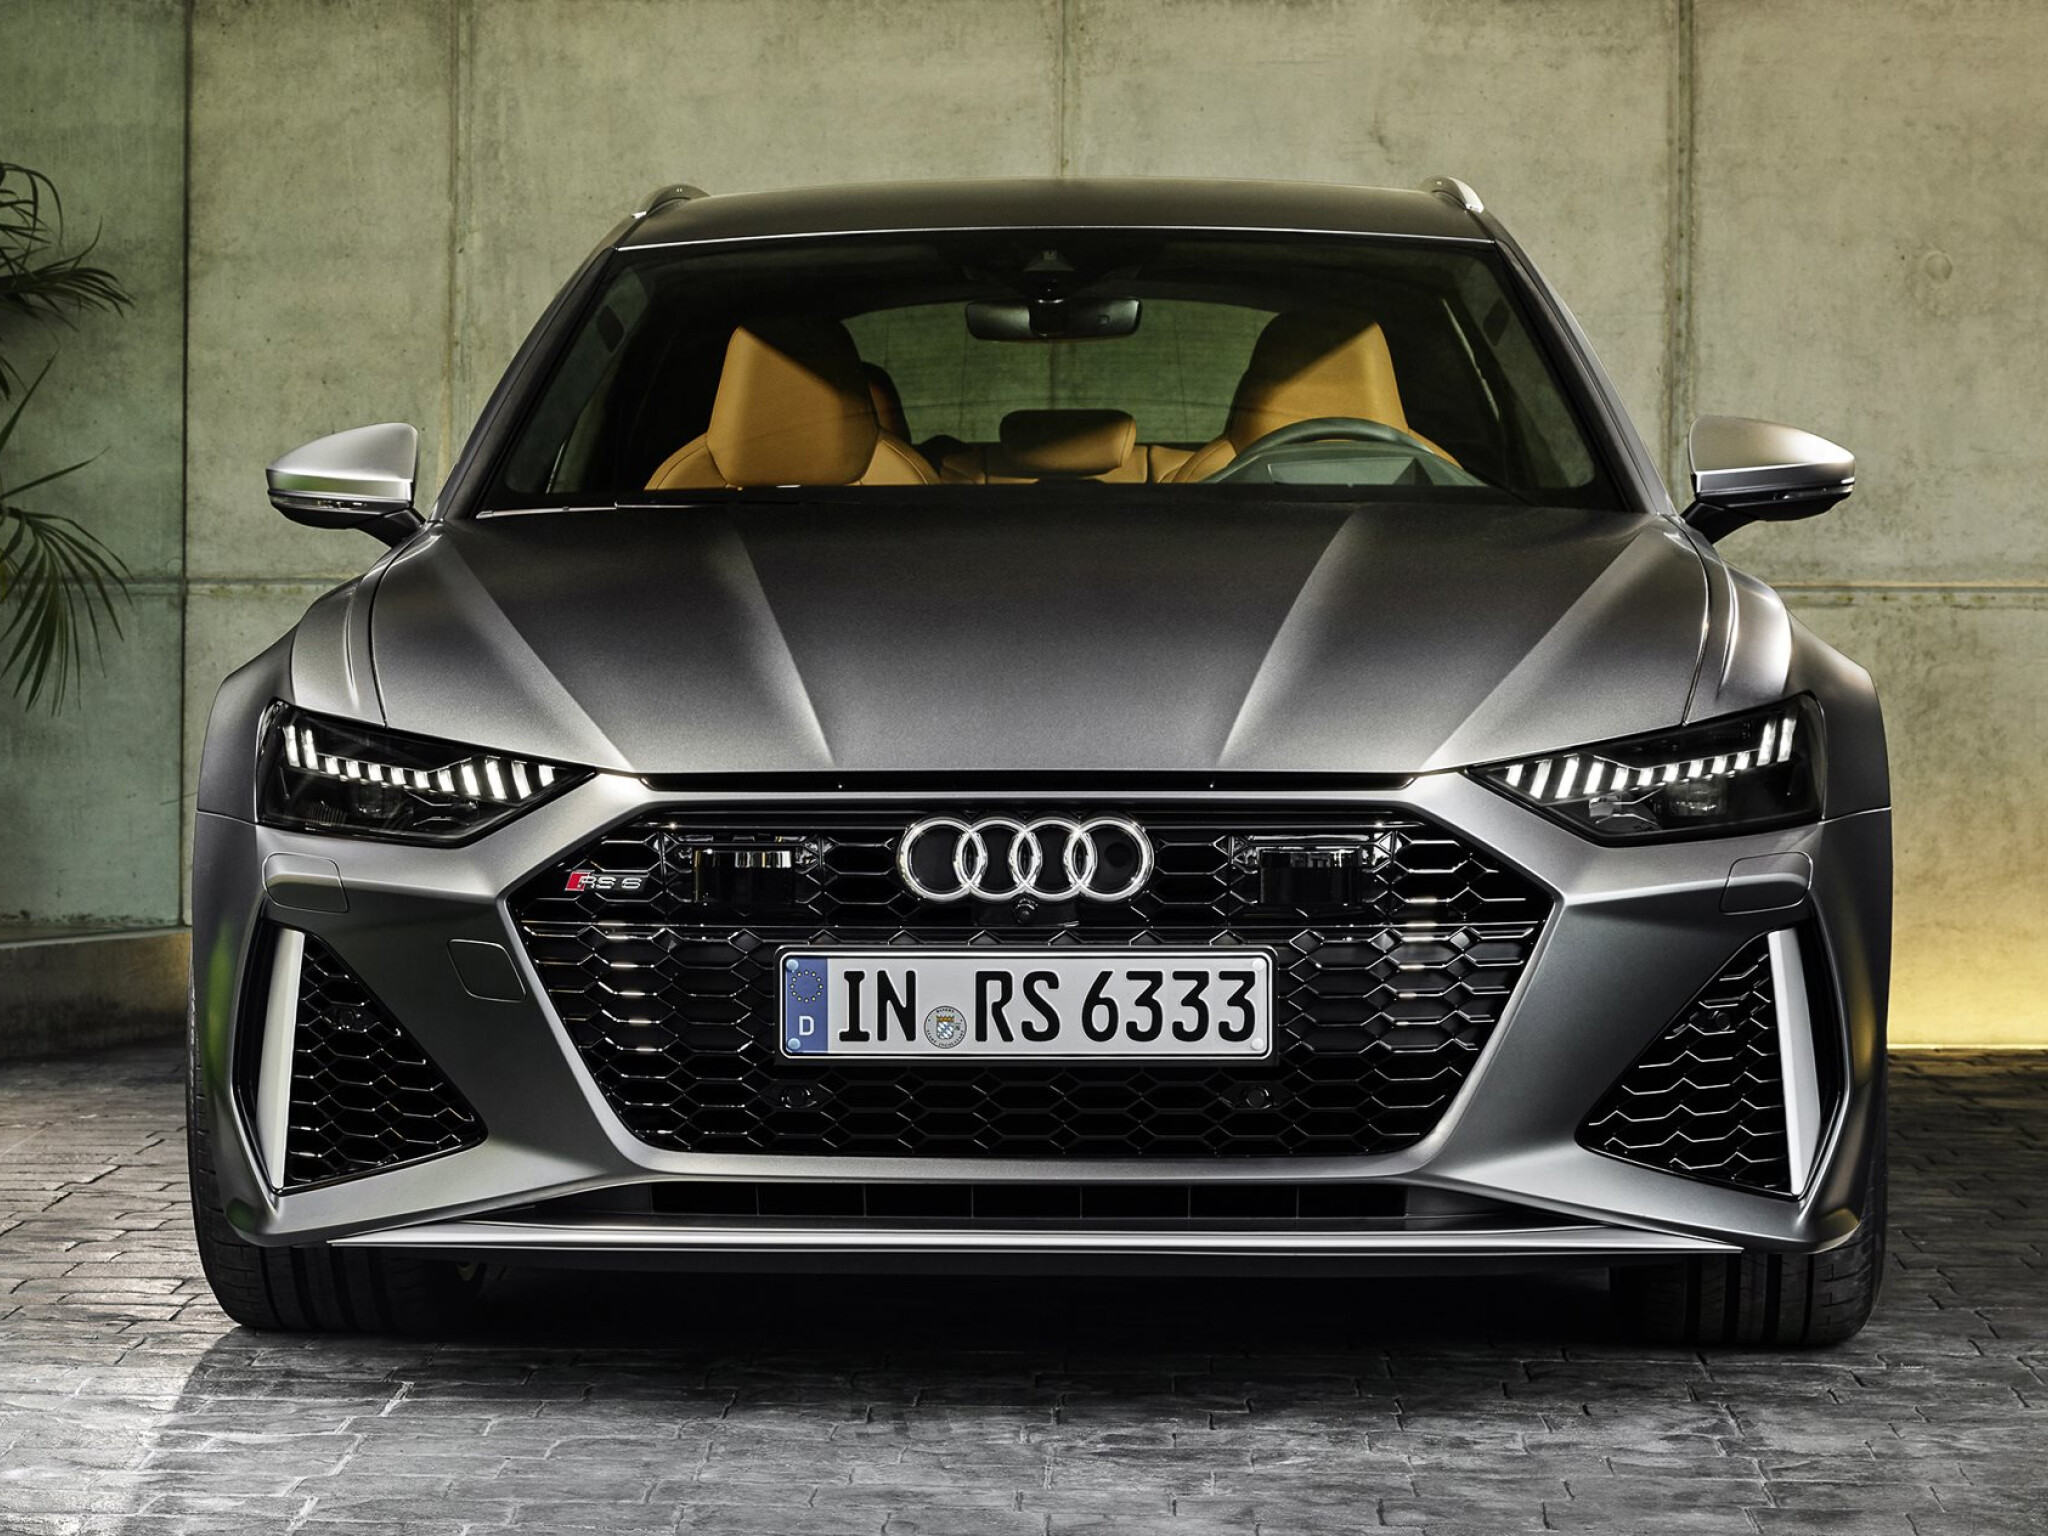 2020 Audi RS6 Avant is the dog hauler you've been looking for